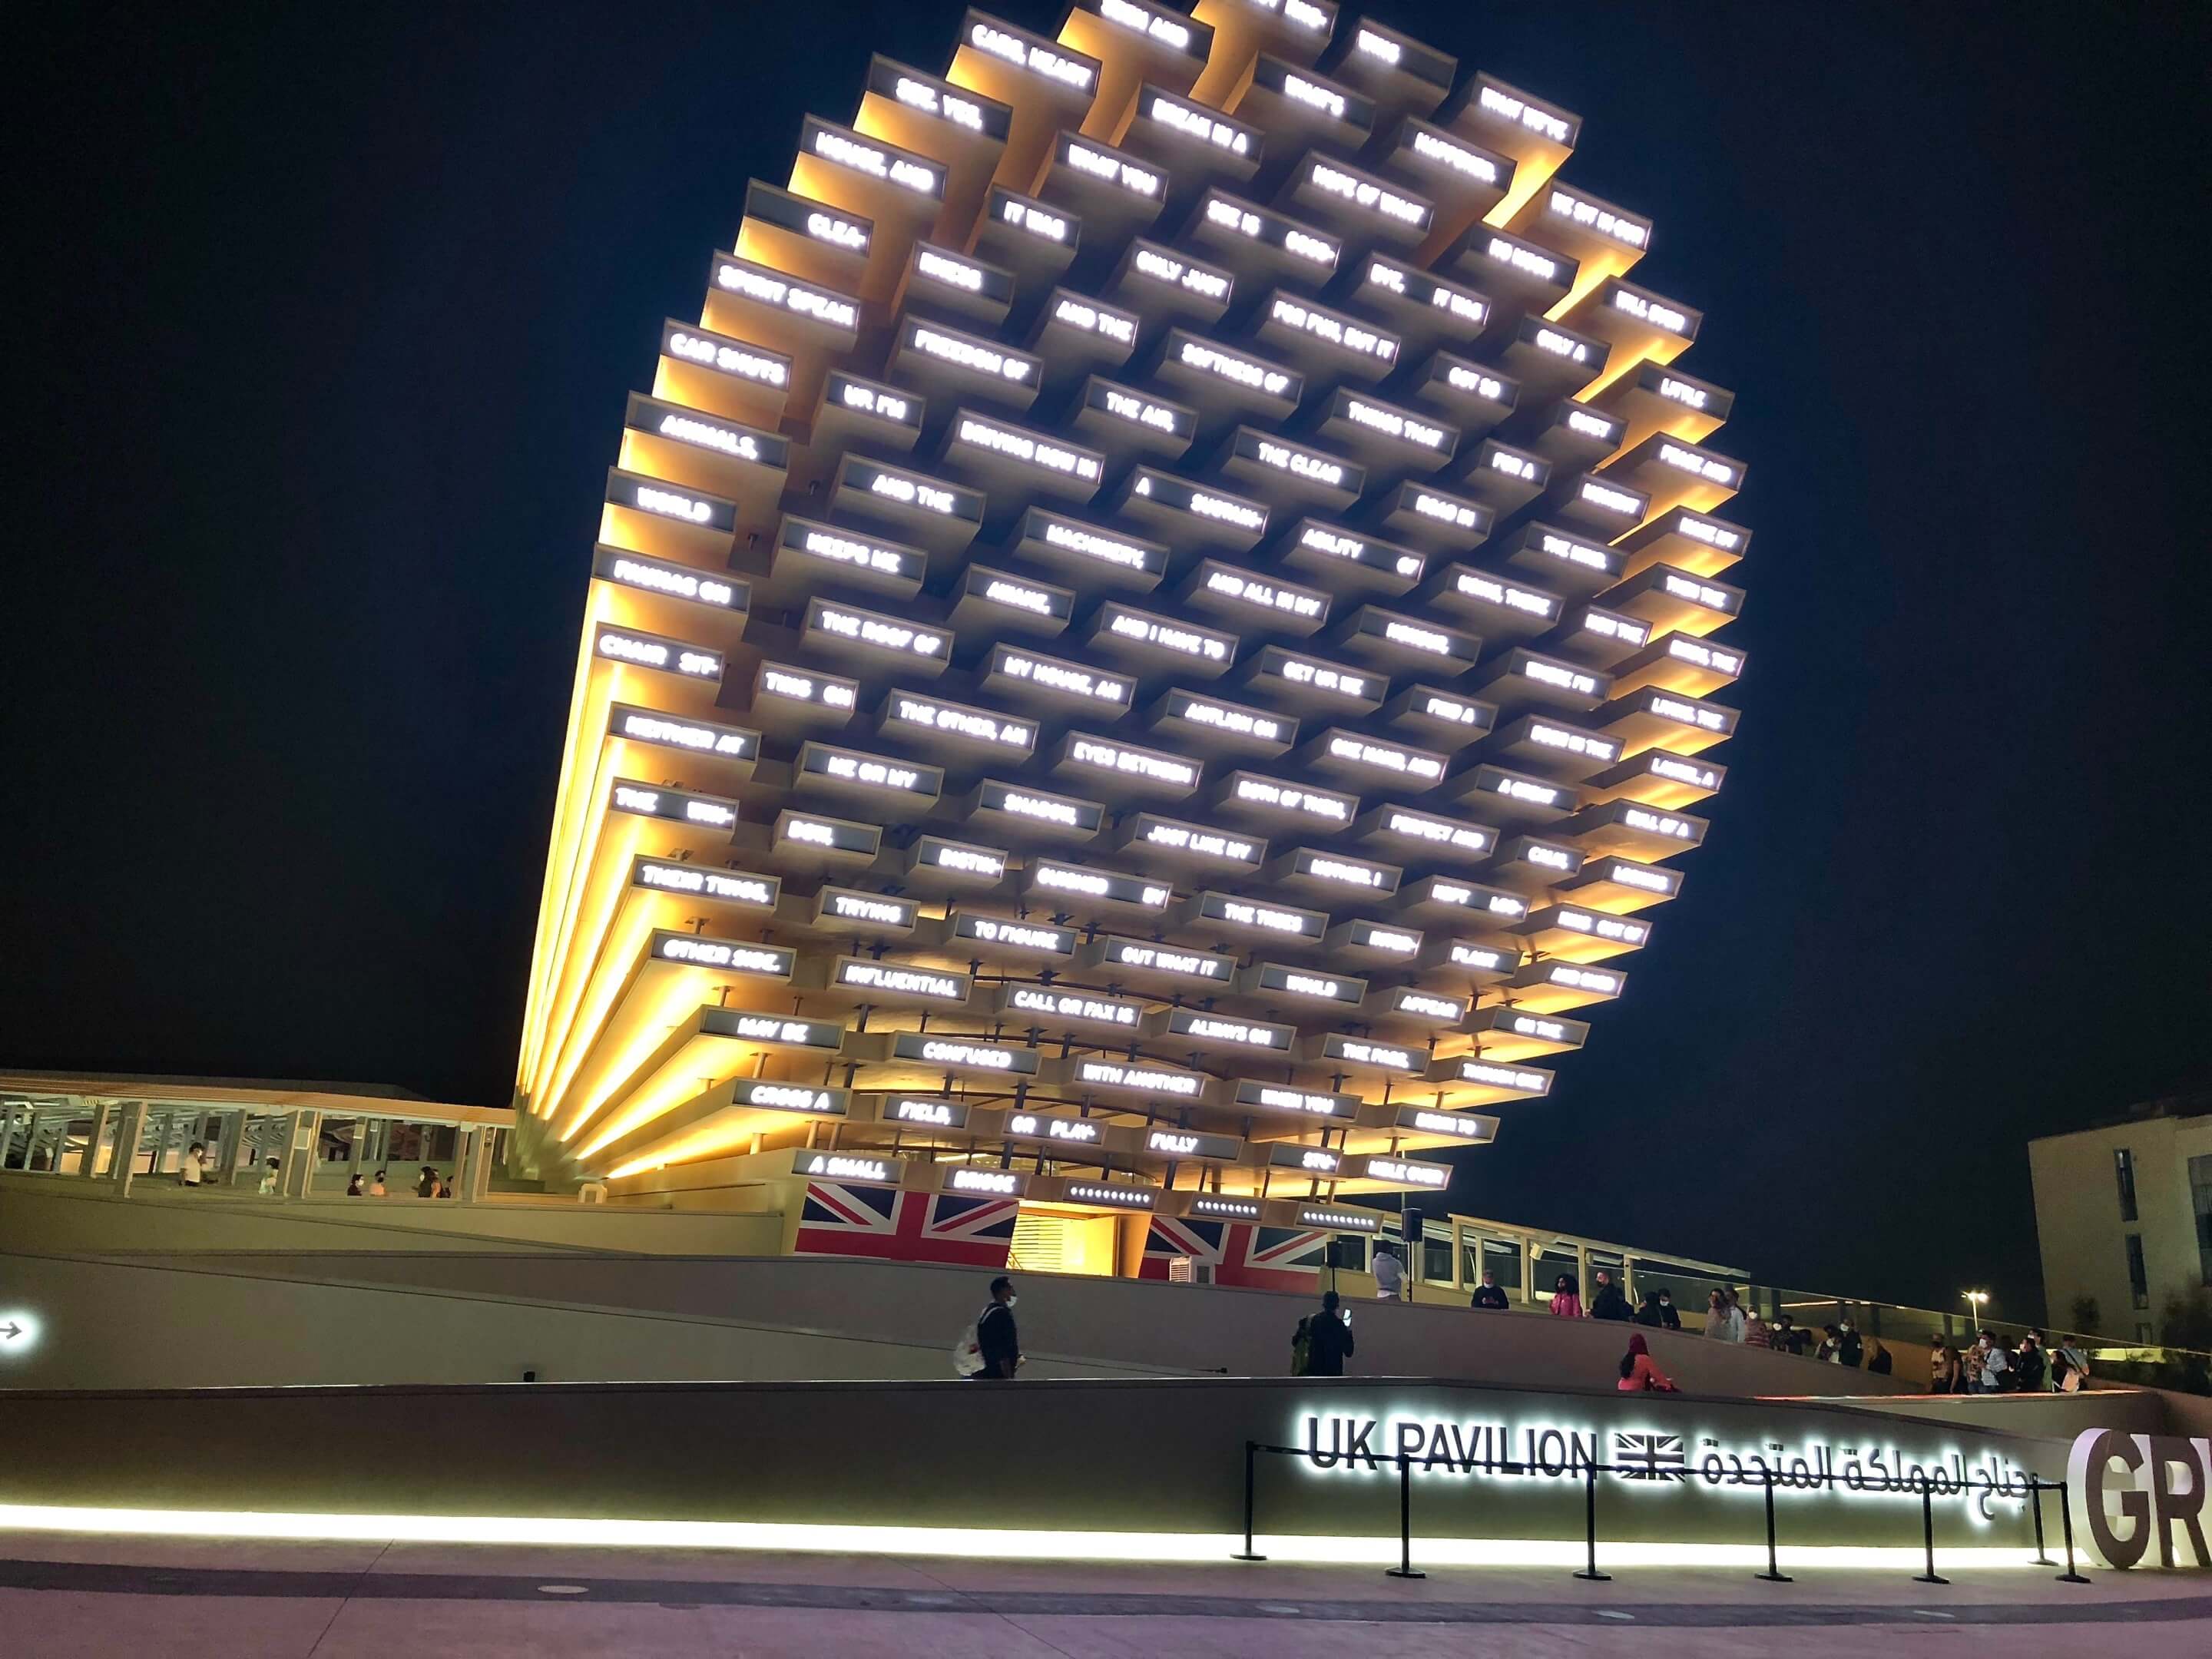 The UK Pavilion features light-up phrases arranged in a large oval atop a plinth.